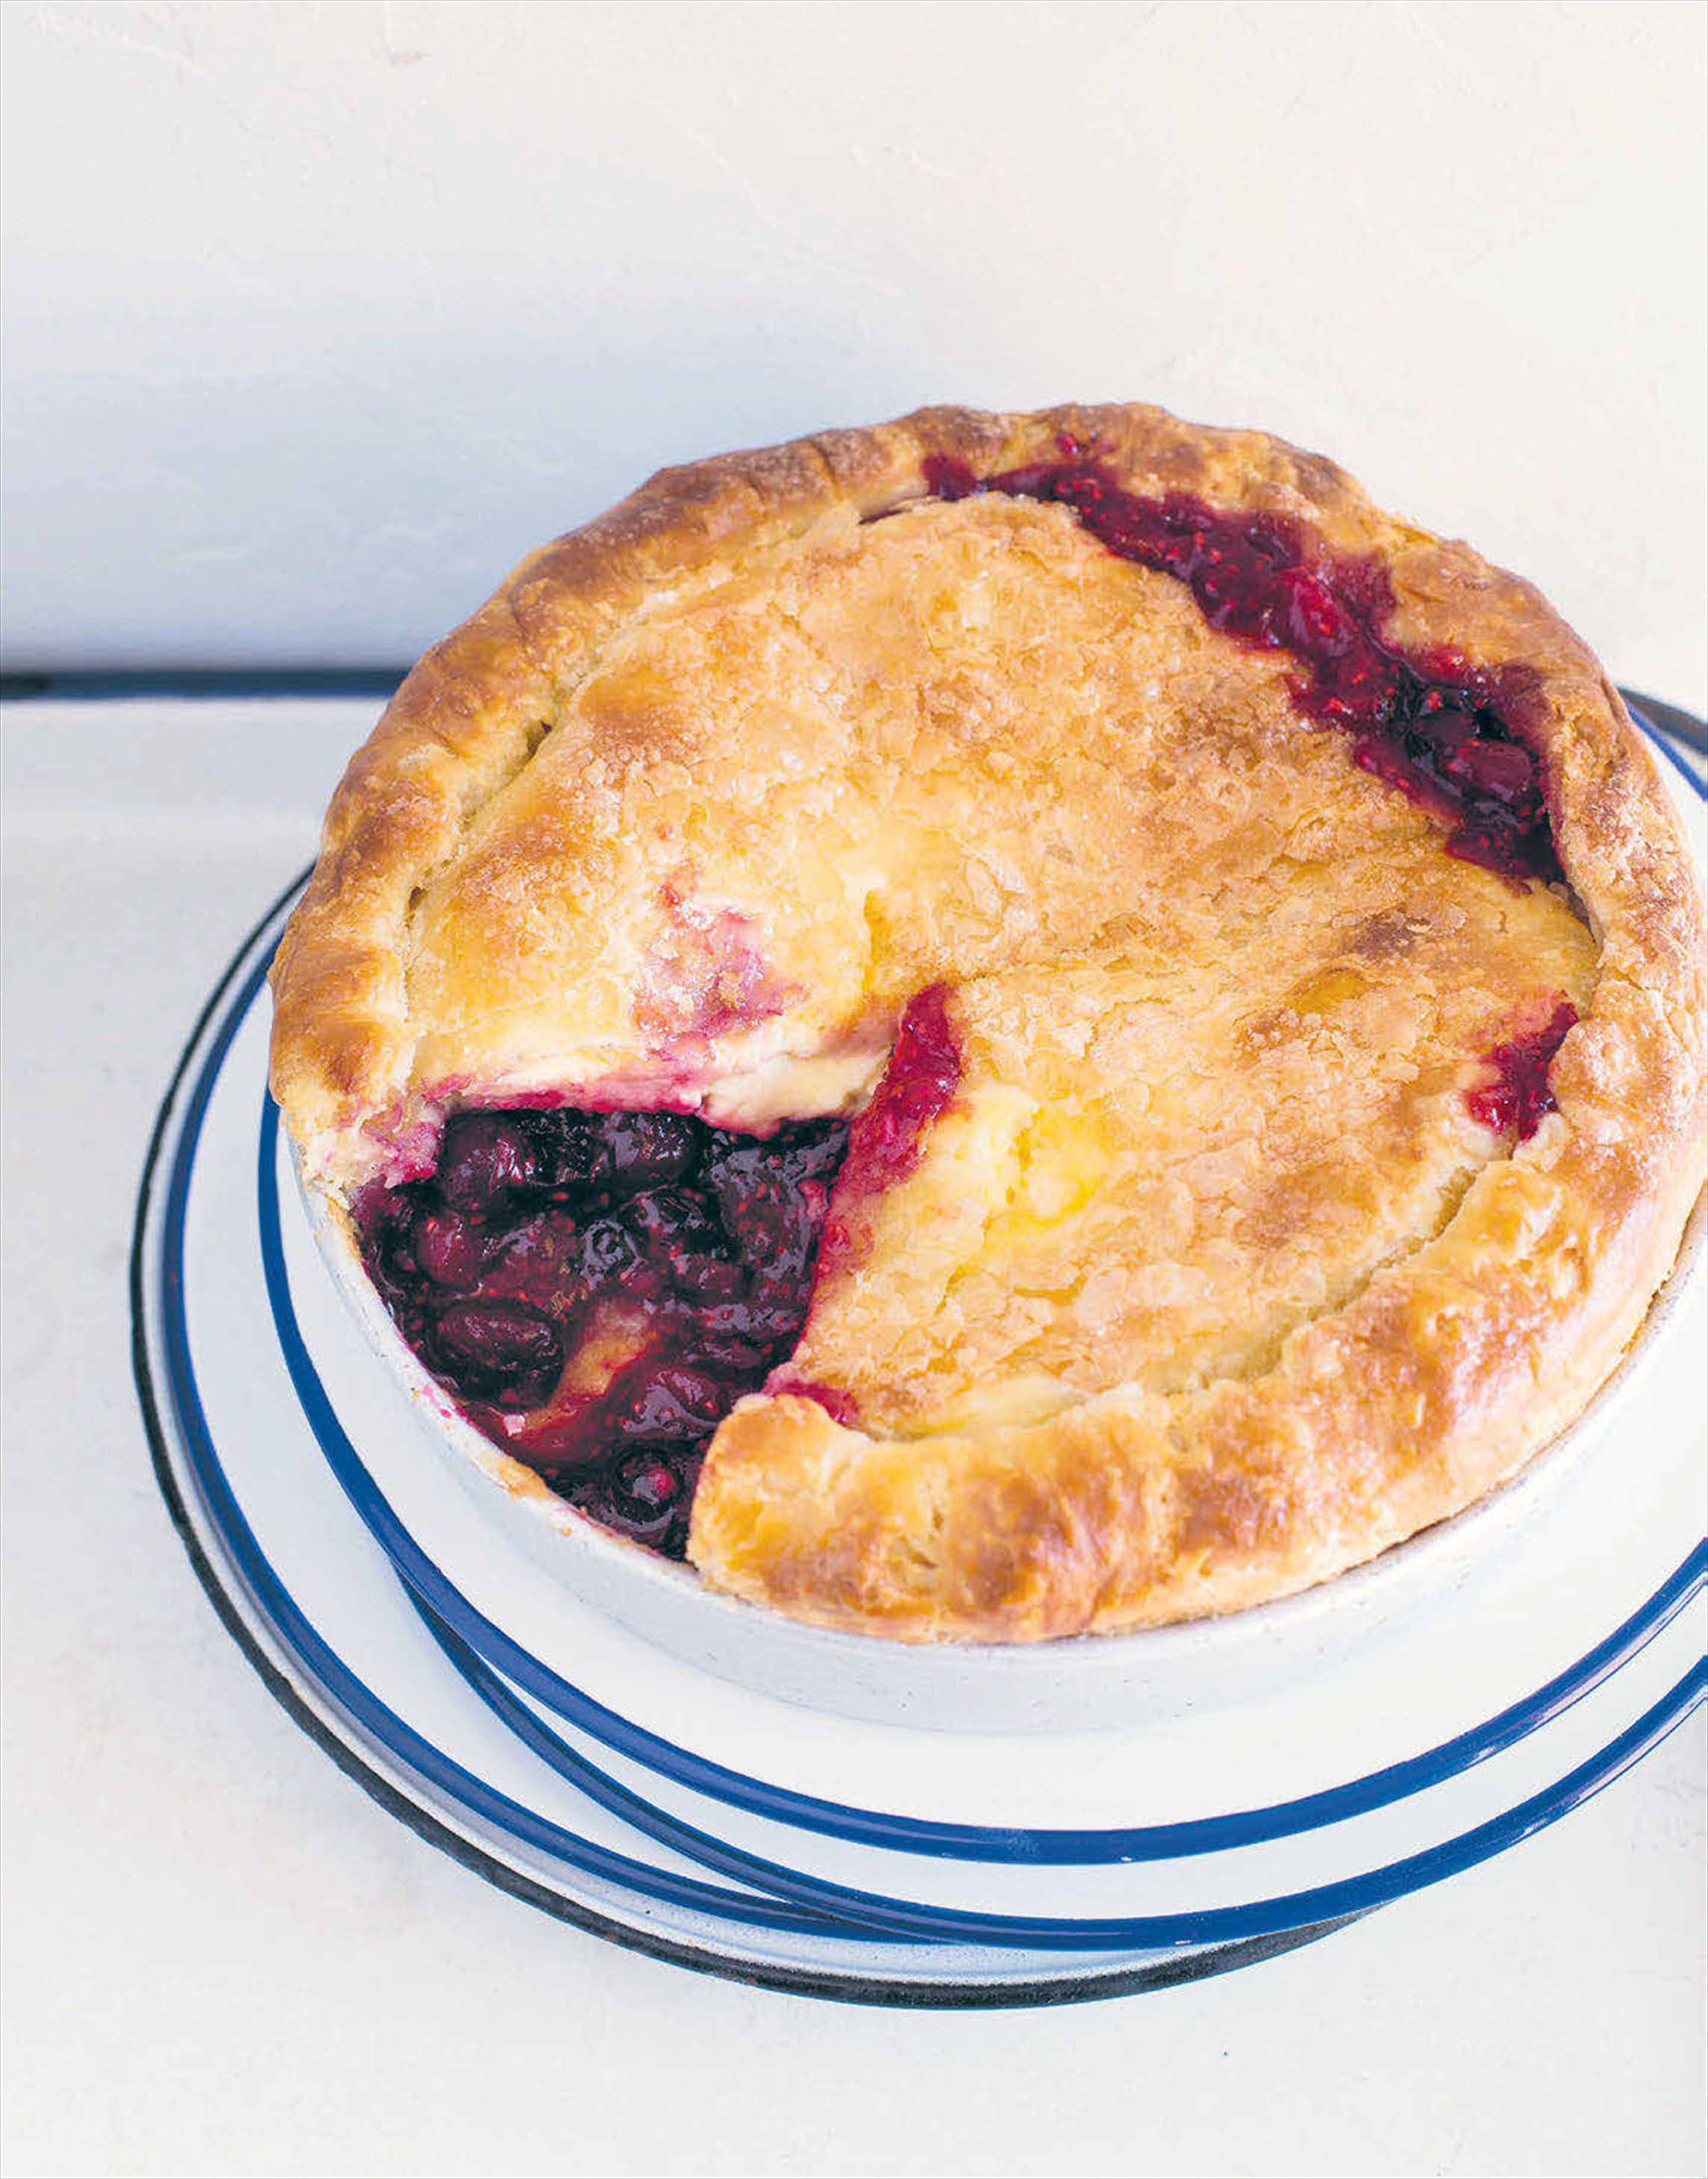 Berry, ginger and sour cream pie